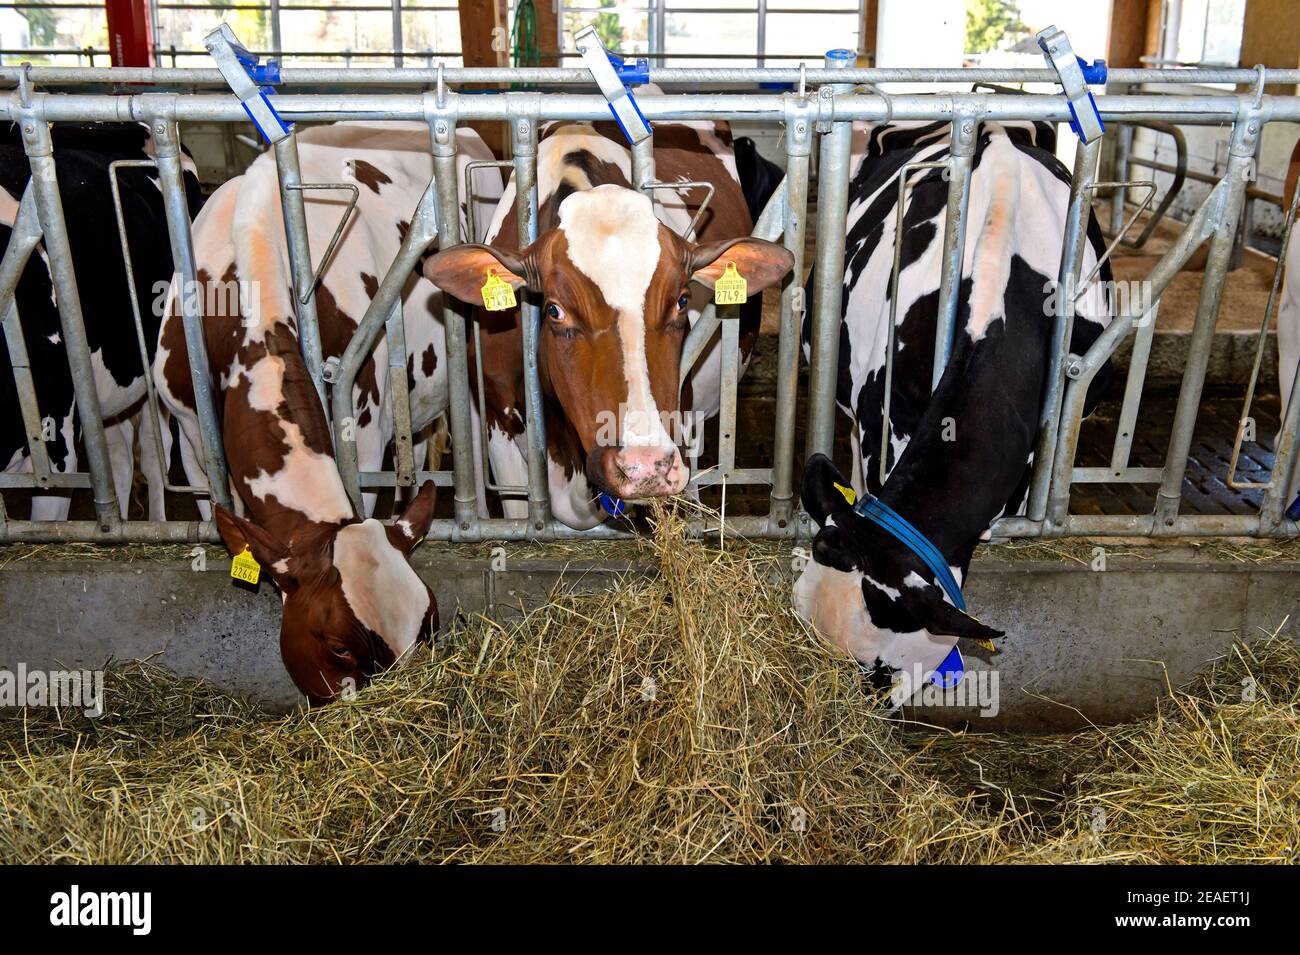 Cows in a dairy barn eating hay, Sarnen, Switzerland Stock Photo